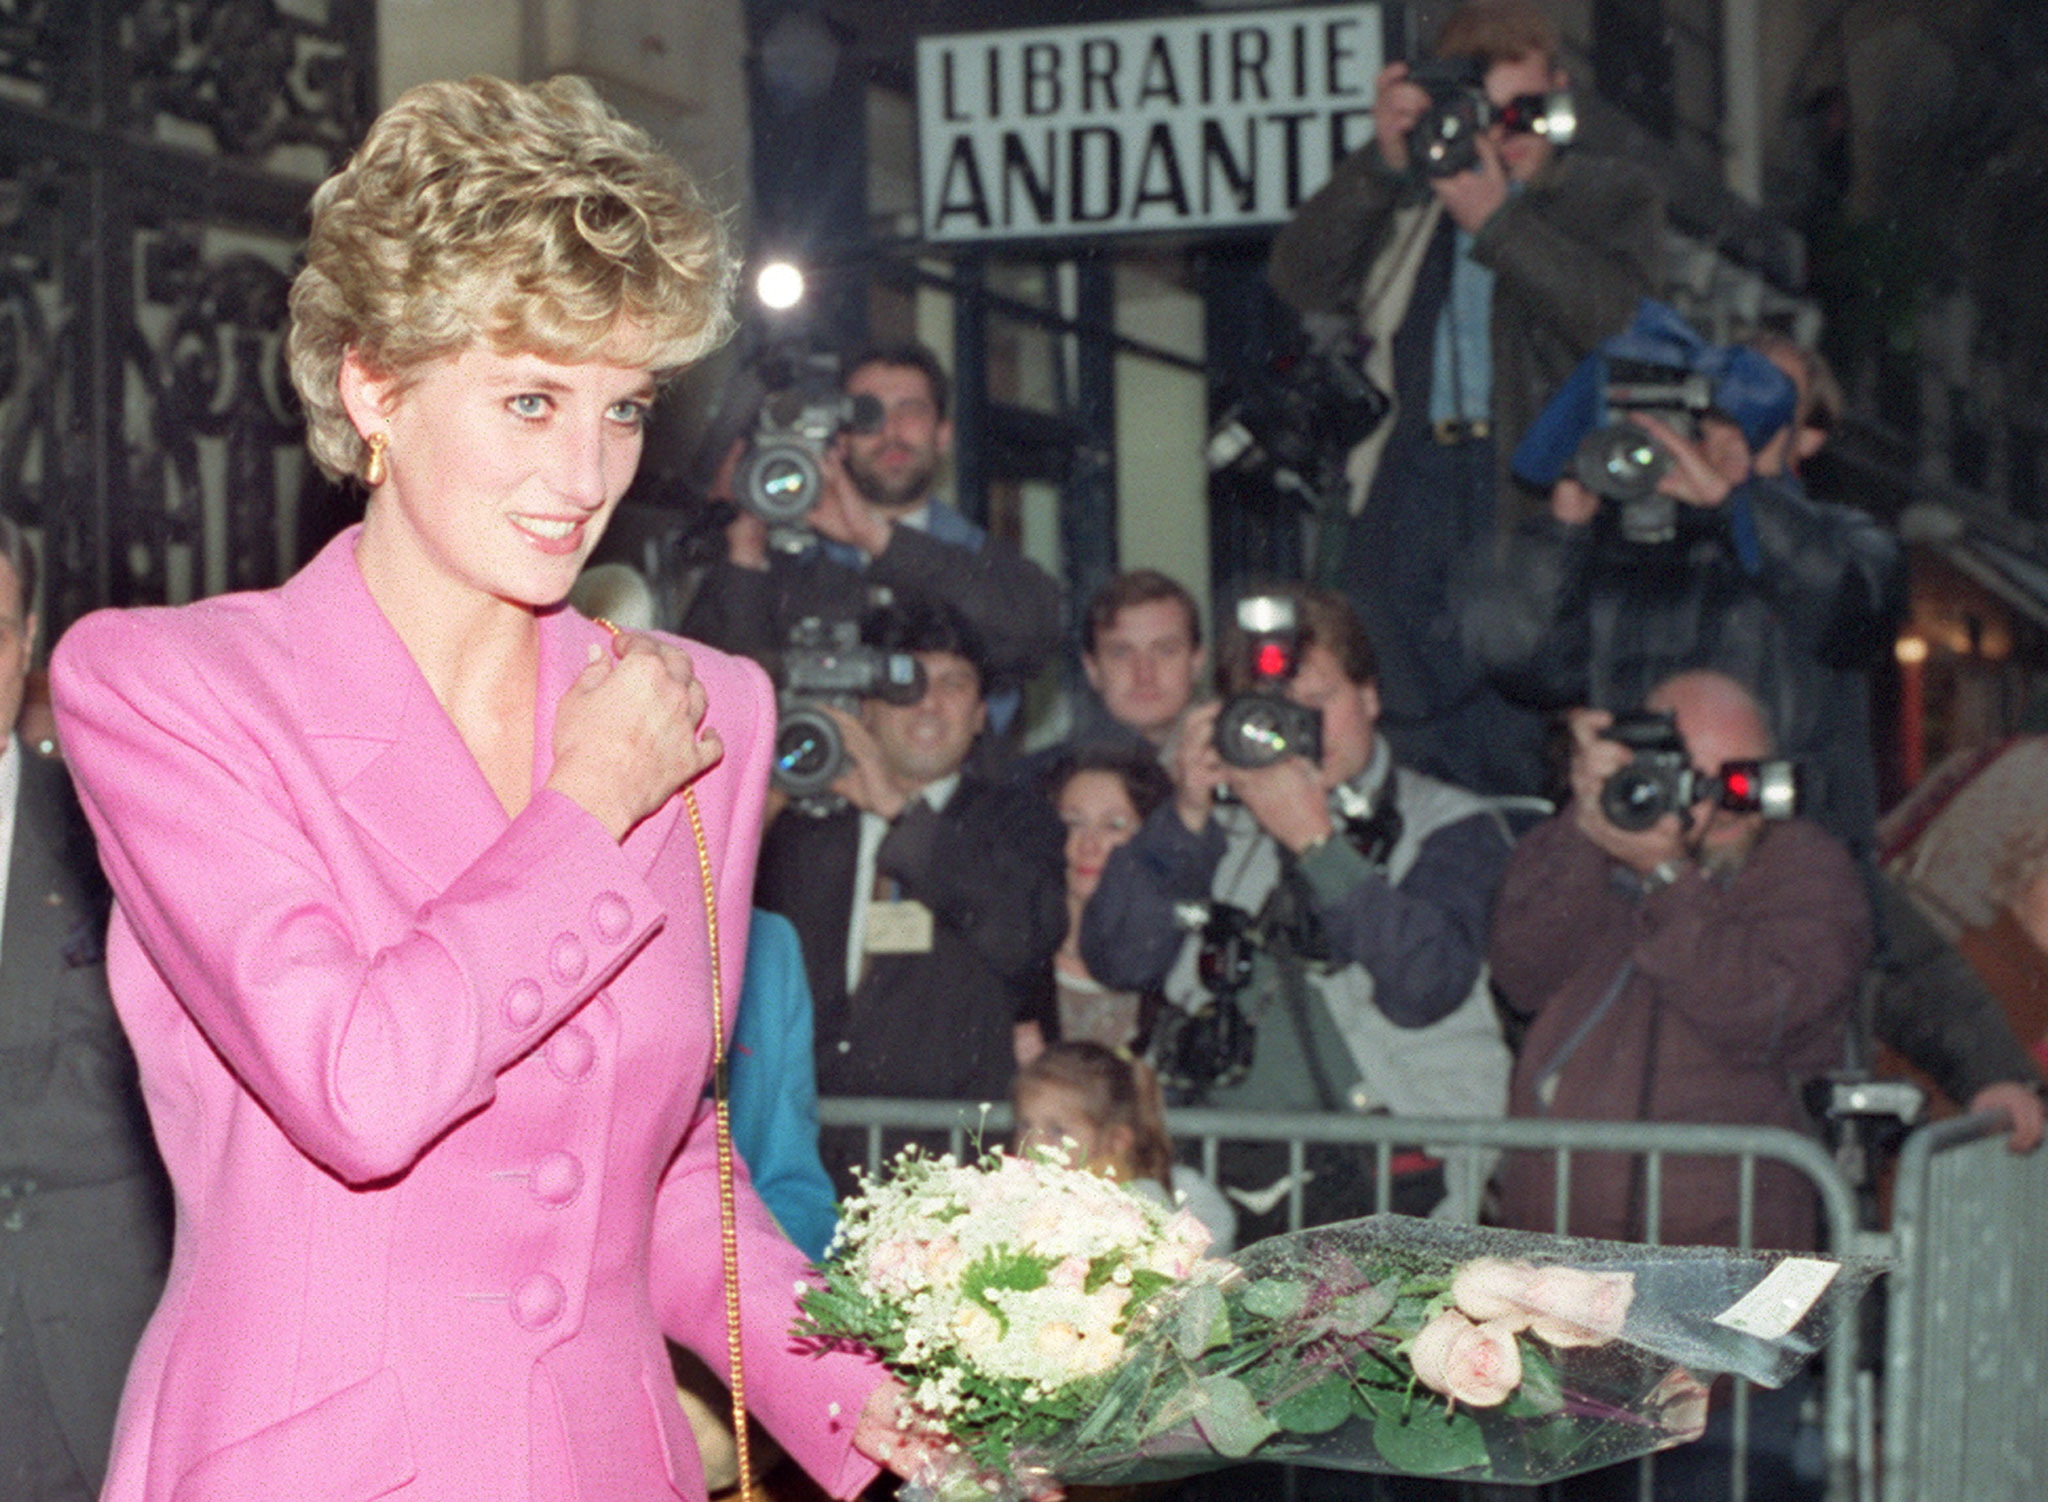 Princess Diana photographed leaving a bookshop in 1992